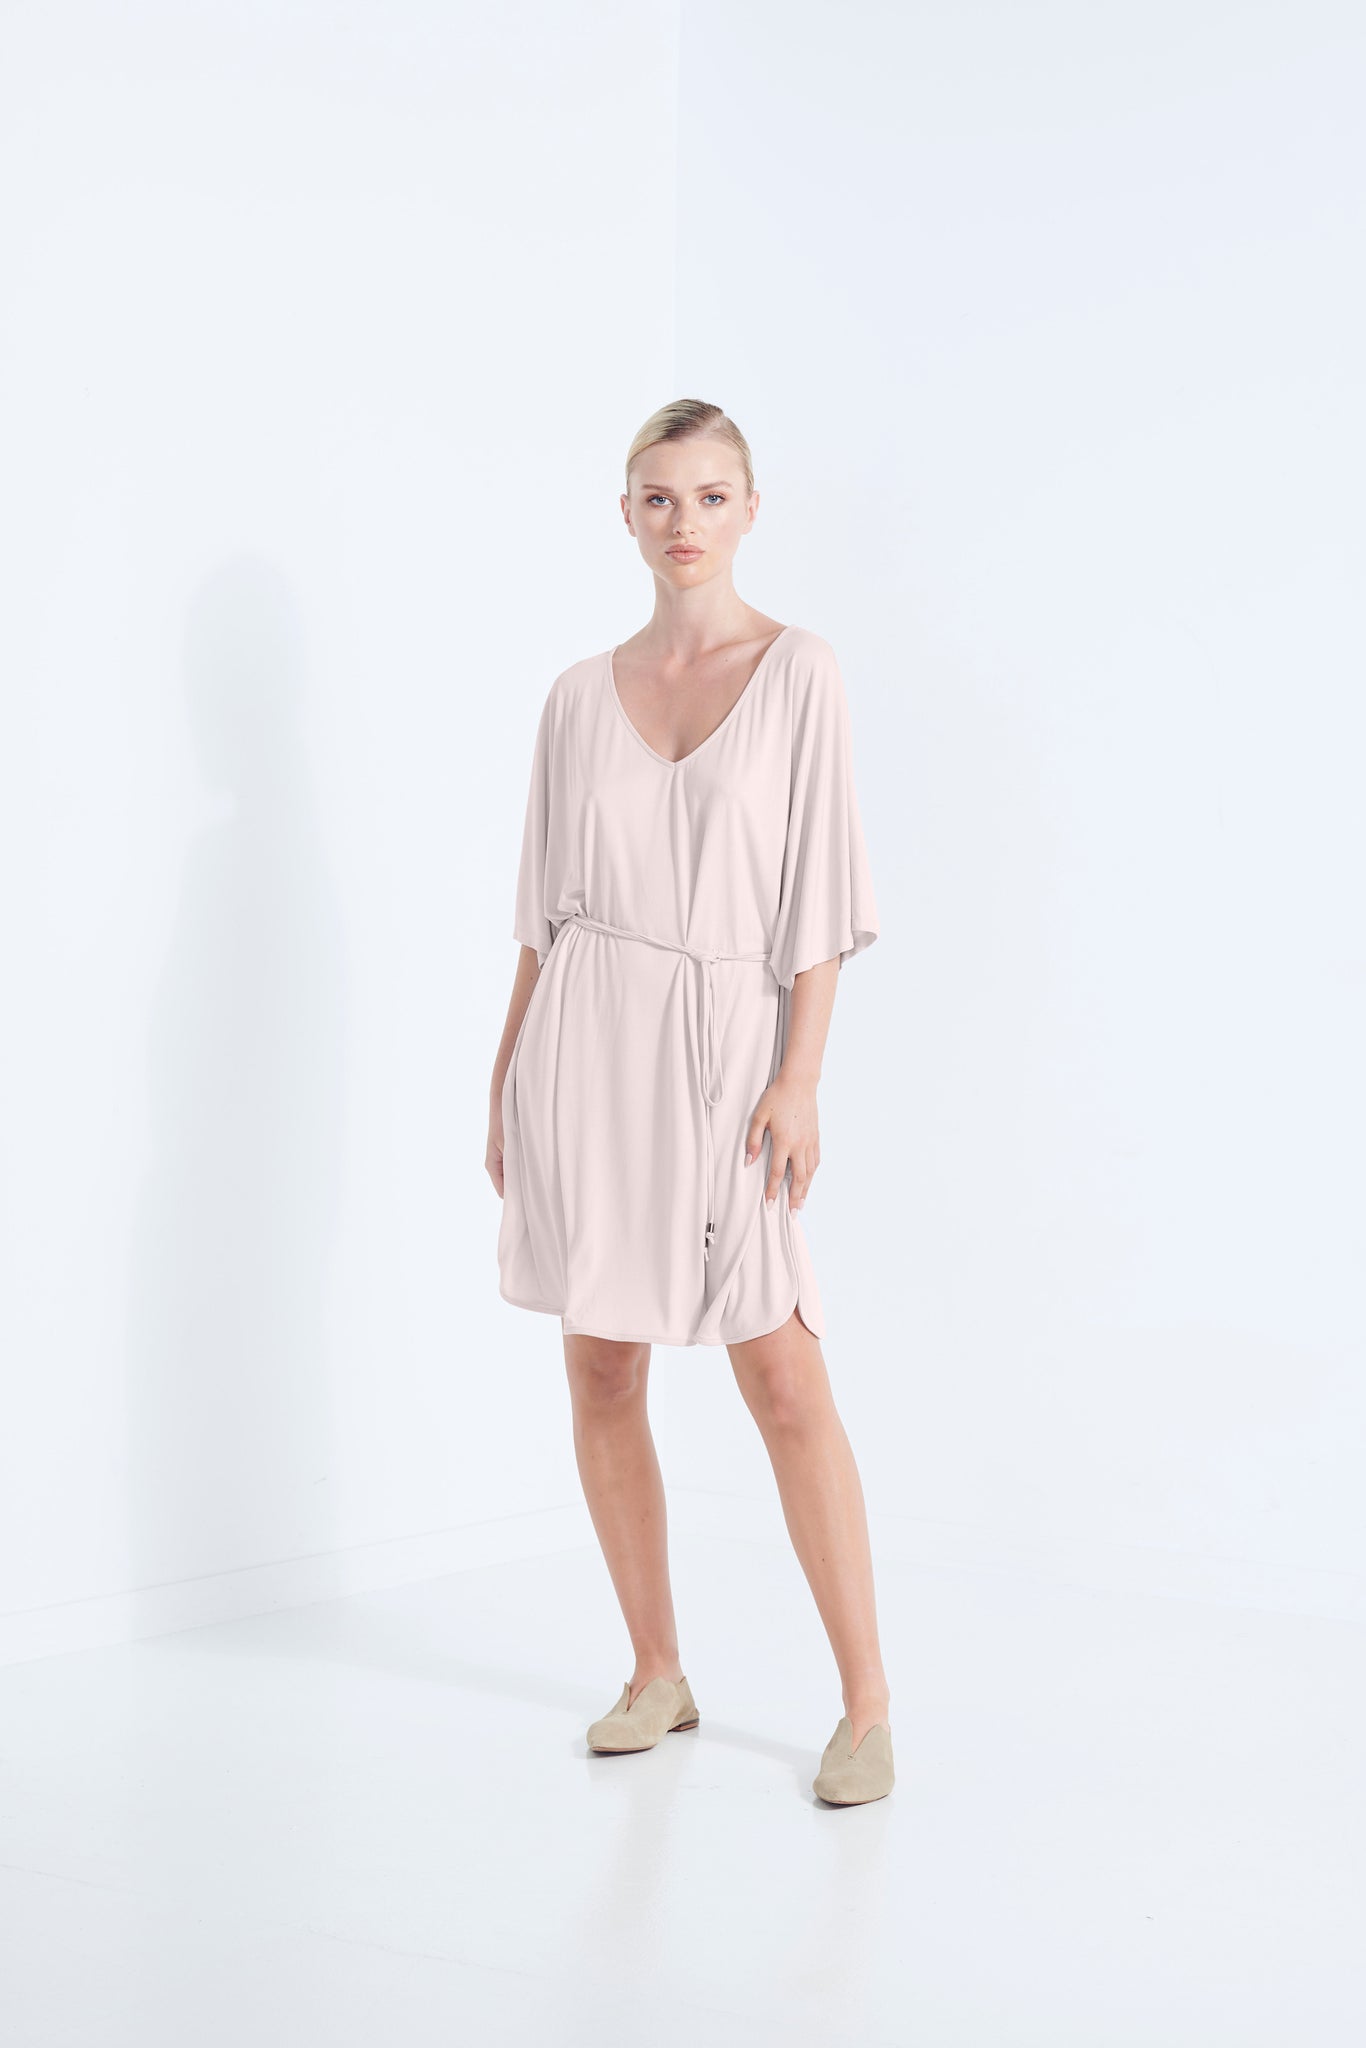 THEMIS DRESS LONGLINE T-SHIRT BEECHWOOD MODAL STRETCH WITH REMOVABLE TIE PIPISHELL WASHED PALE PINK FRONT VIEW